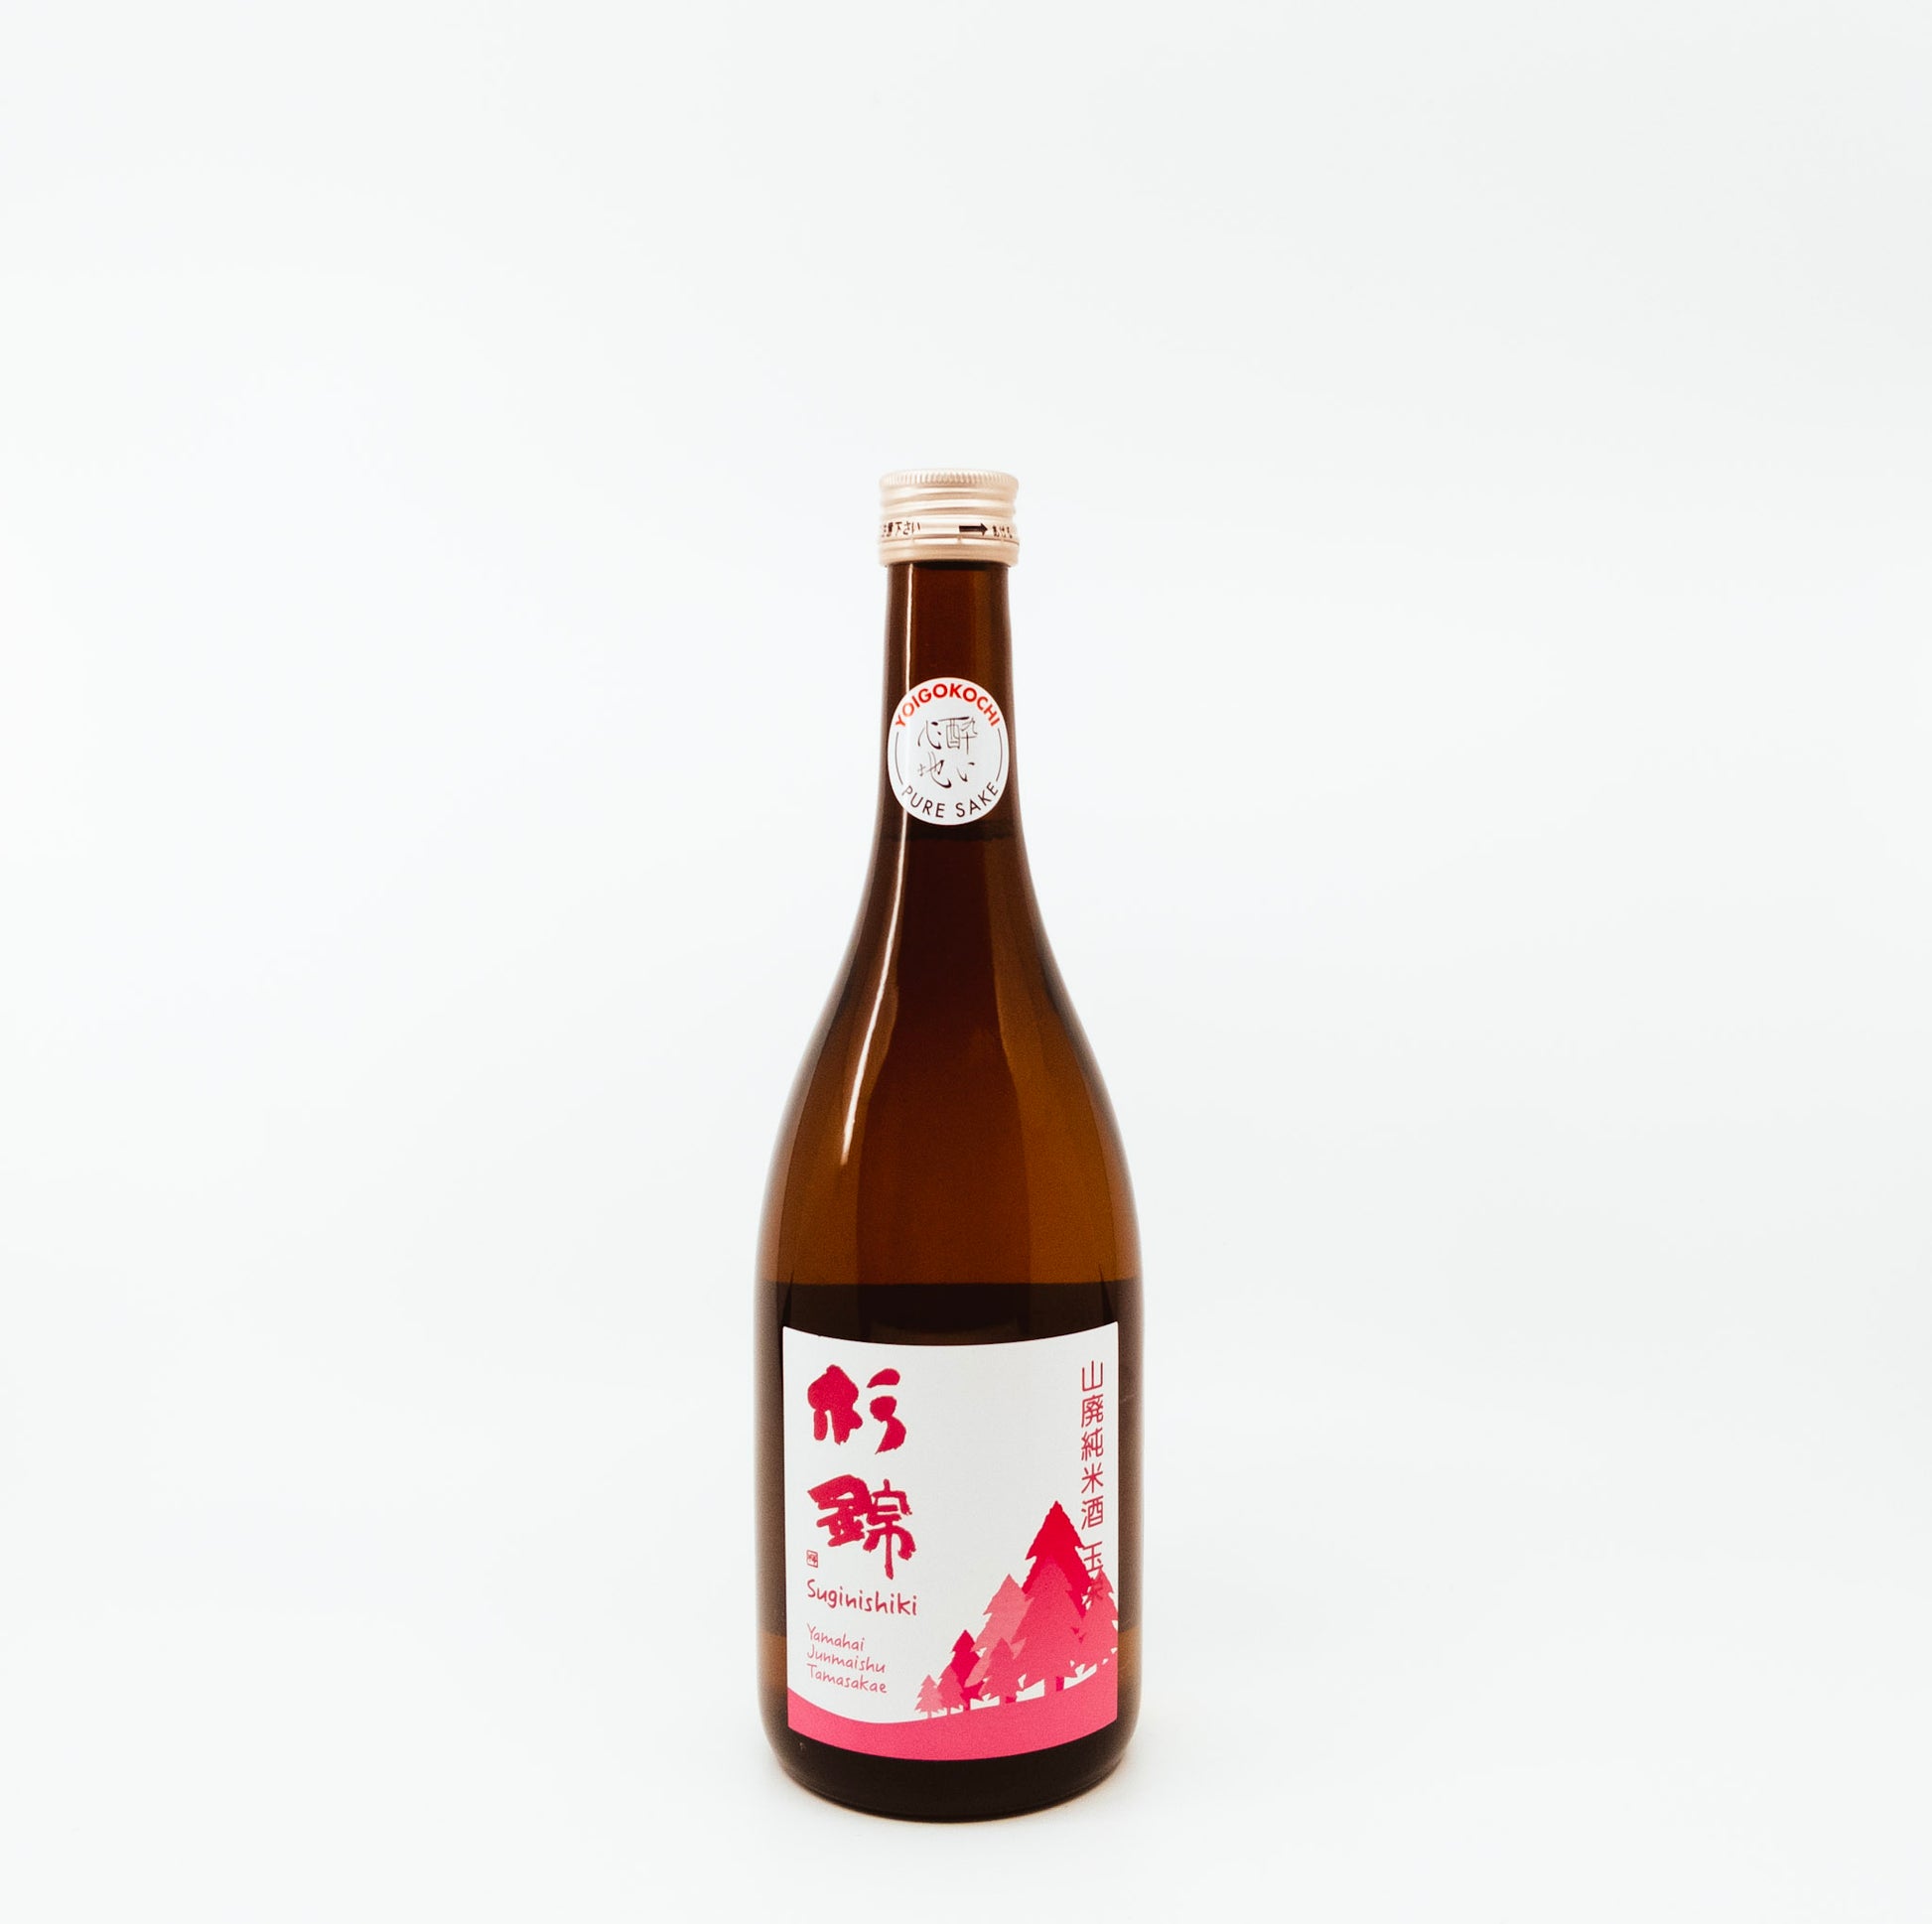 brown bottle with pink trees on white label